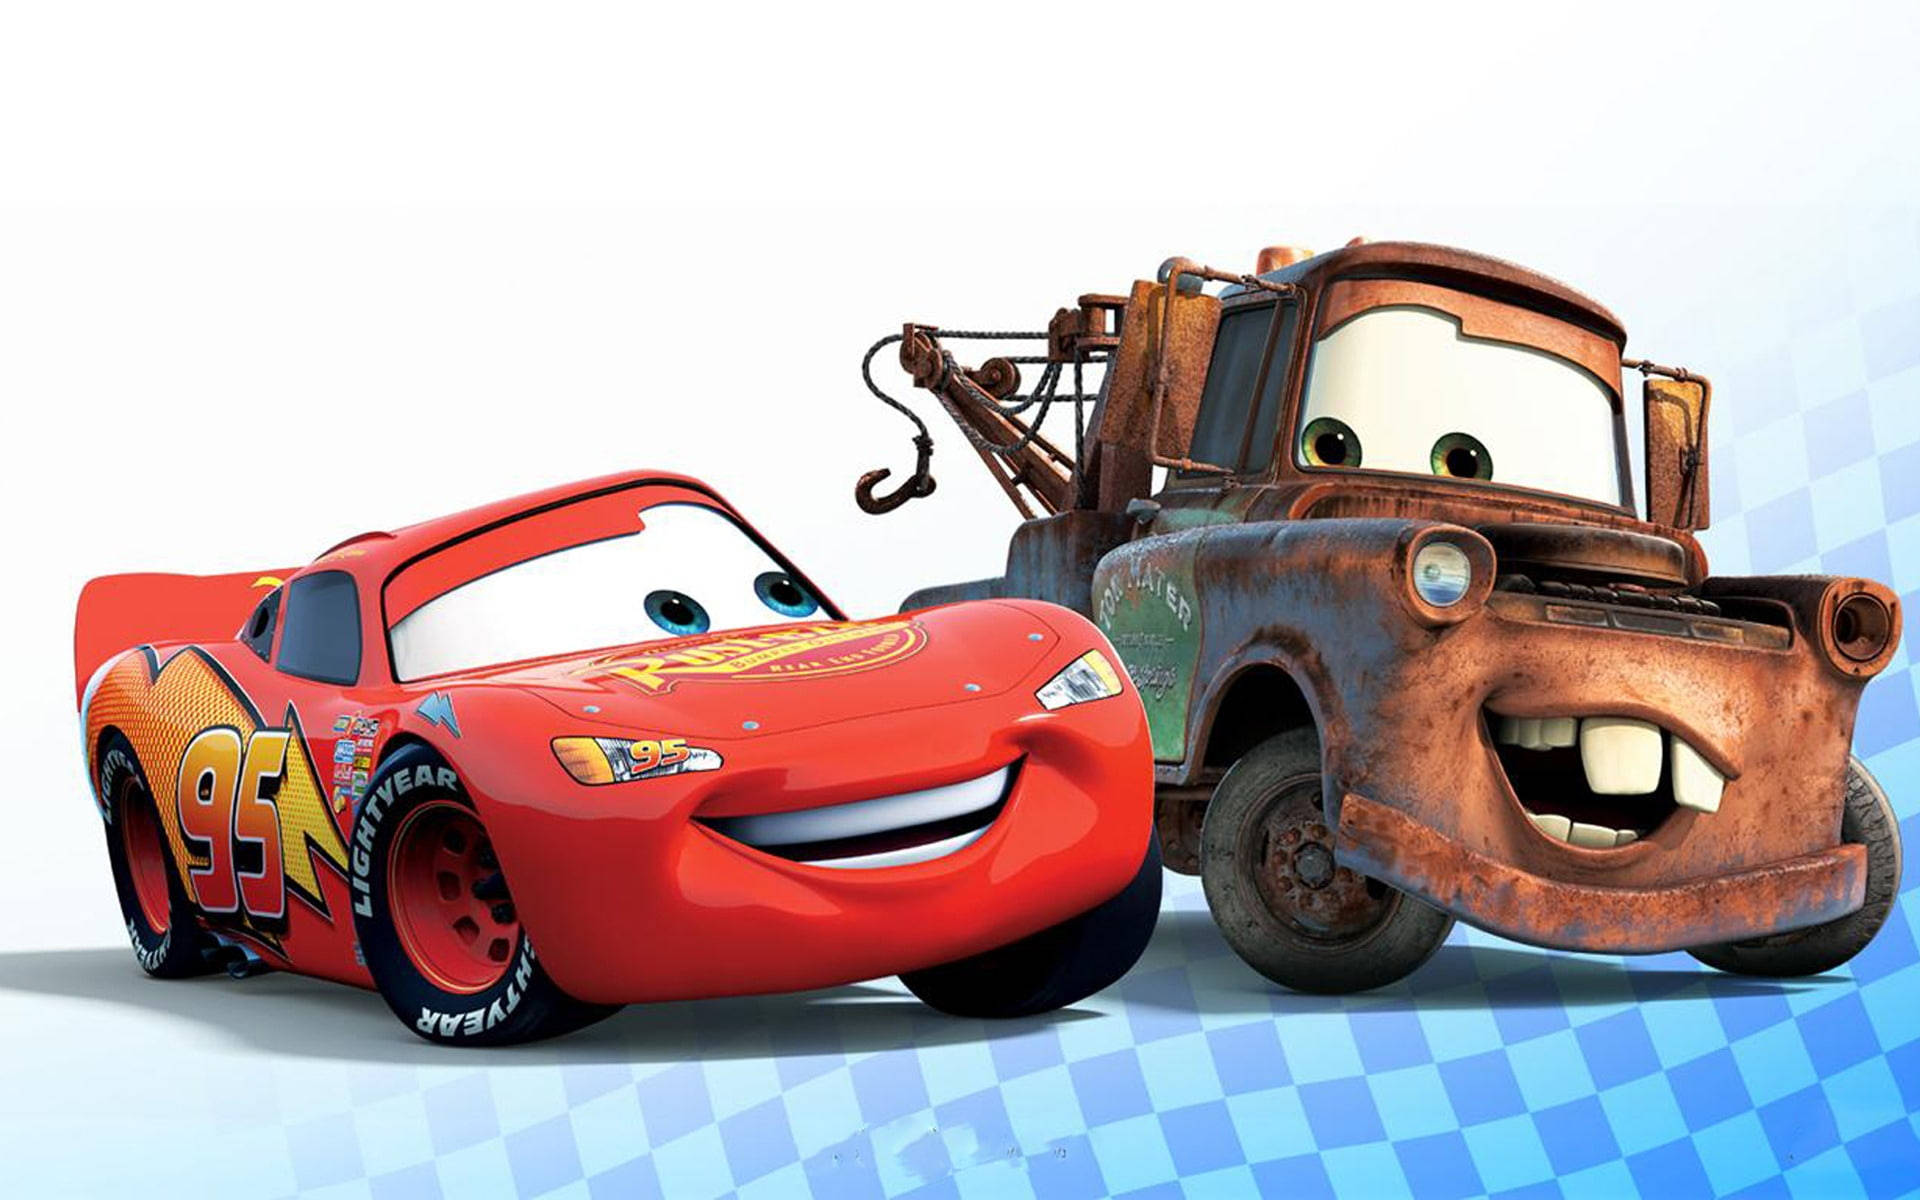 Top 999+ Disney Cars Wallpapers Full HD, 4K✅Free to Use